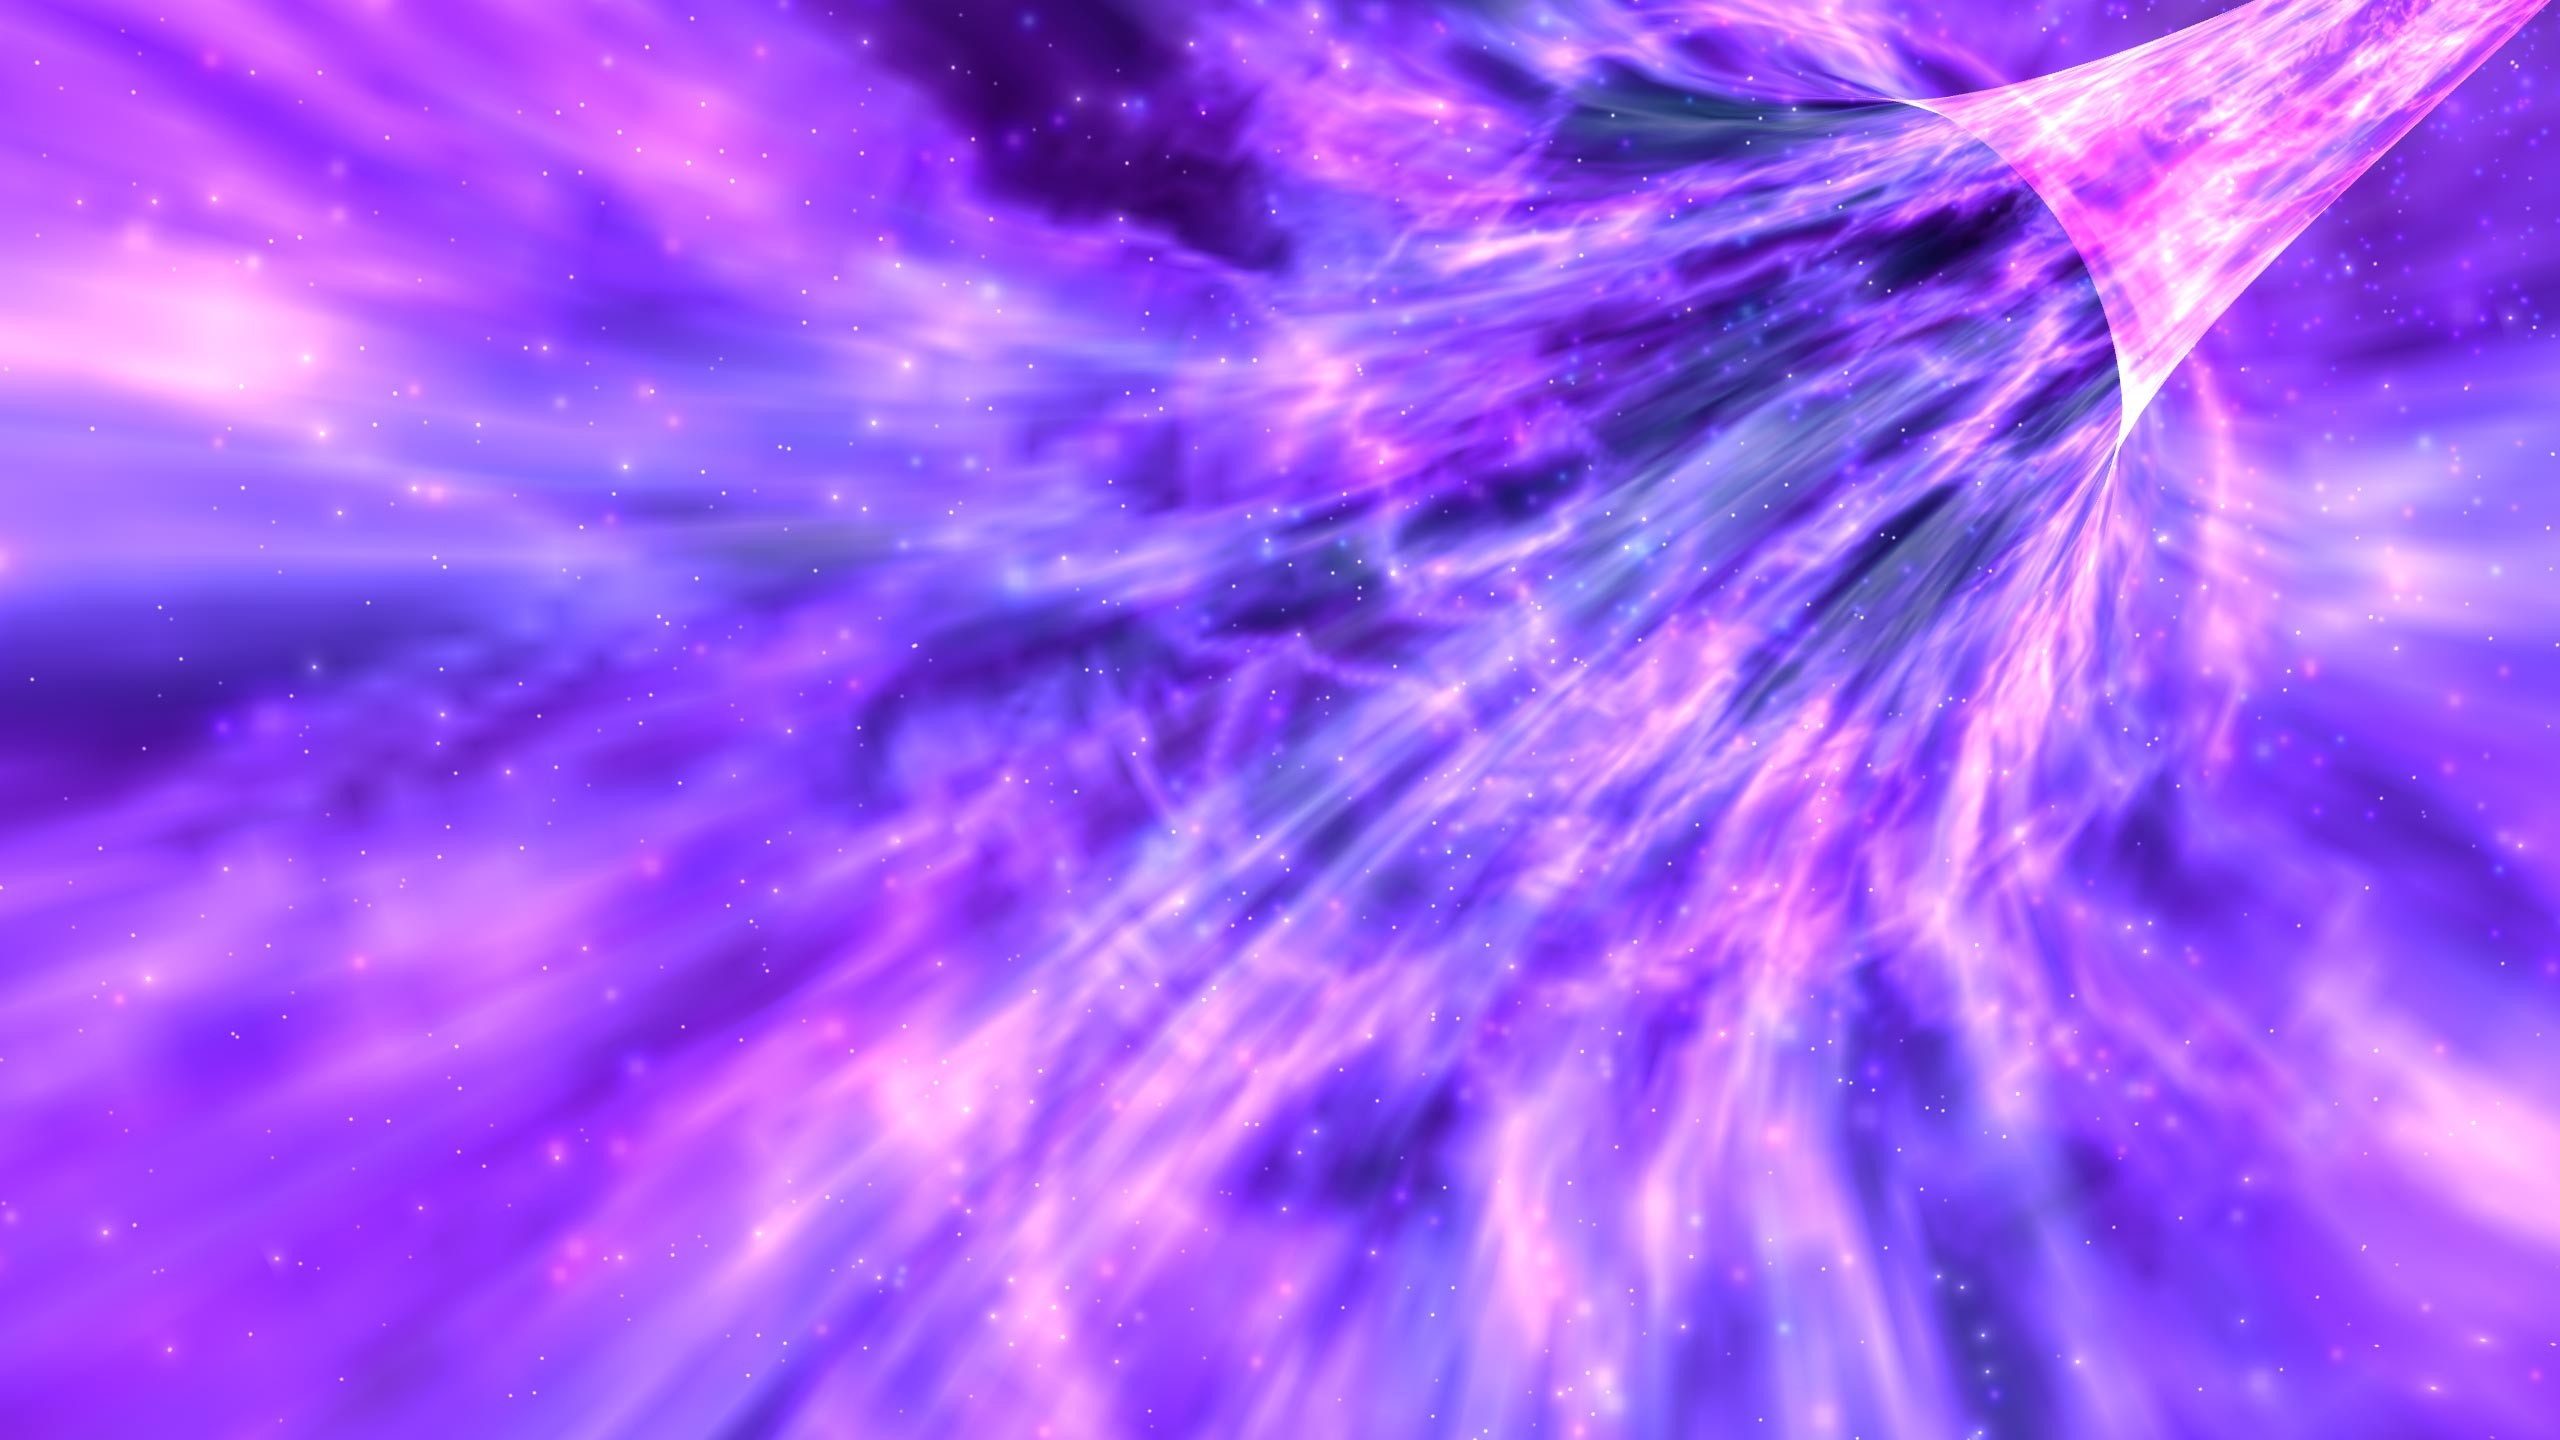 A purple explosion in space - 3D